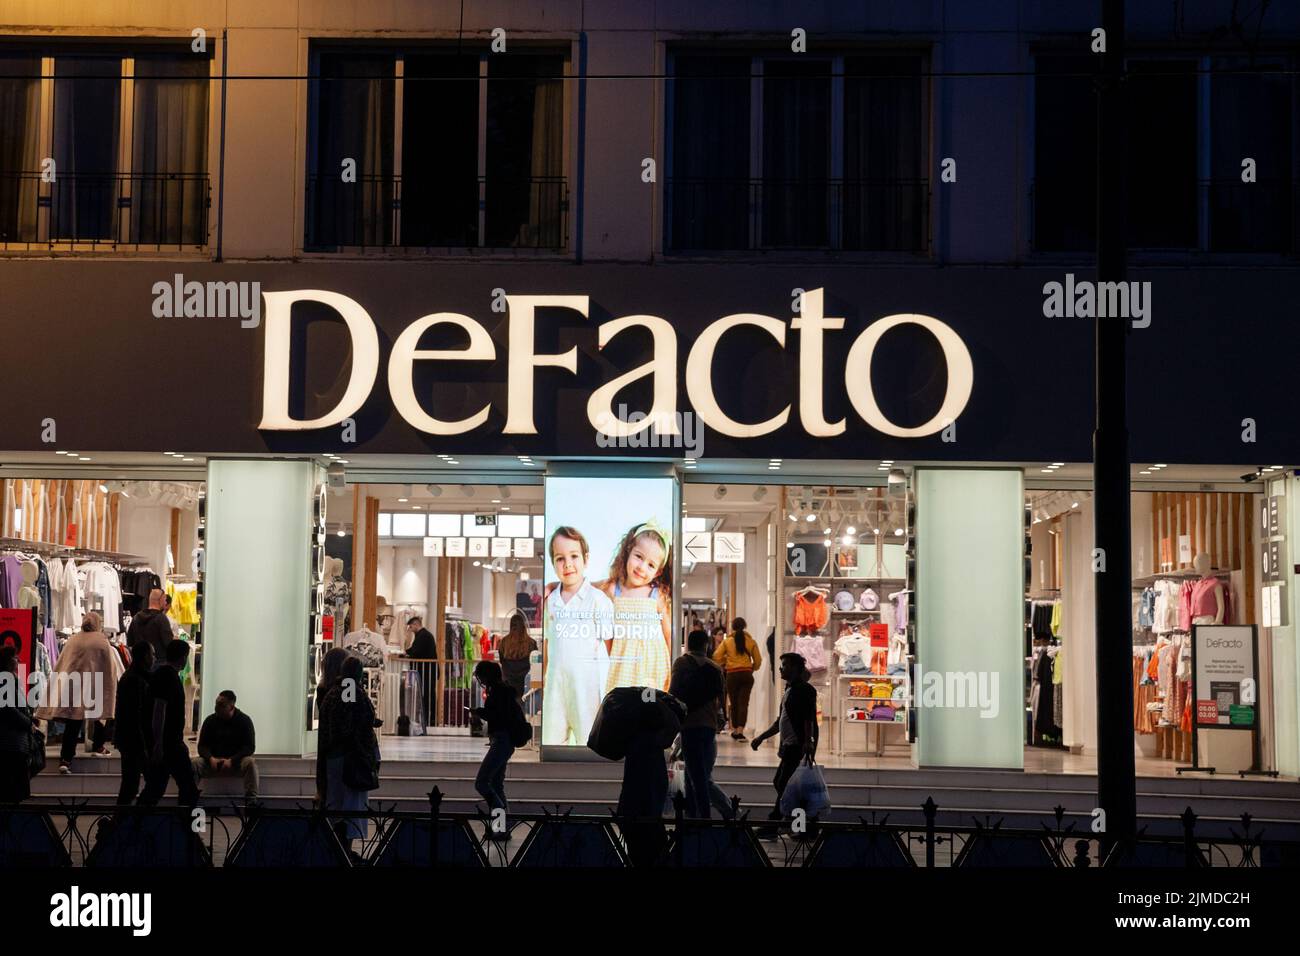 Picture of a sign with the logo of Defacto taken on their shop for Istanbul, Turkey. DeFacto is a clothing retailer company. Defacto is a Turkish mult Stock Photo